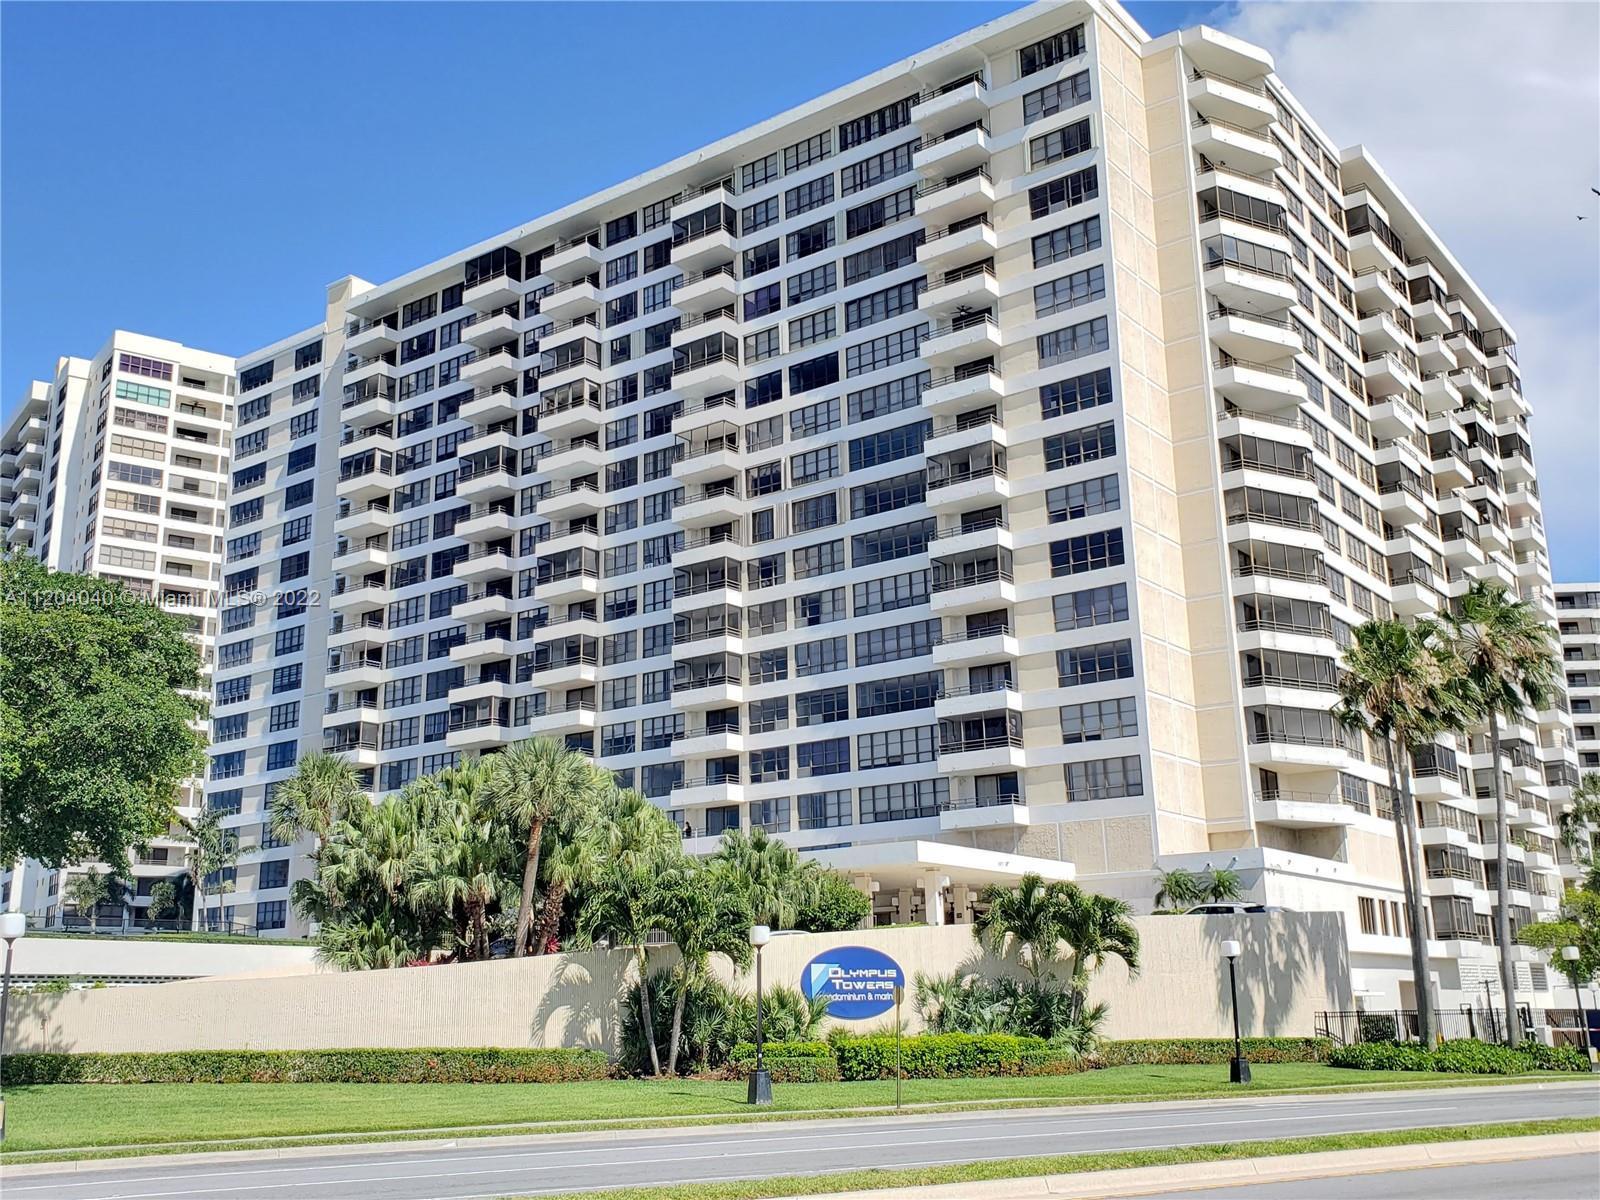 The Beach, Downtown Hallandale, and Gulfstream Park surround this luxury 2 bedroom, 2 bathroom condo